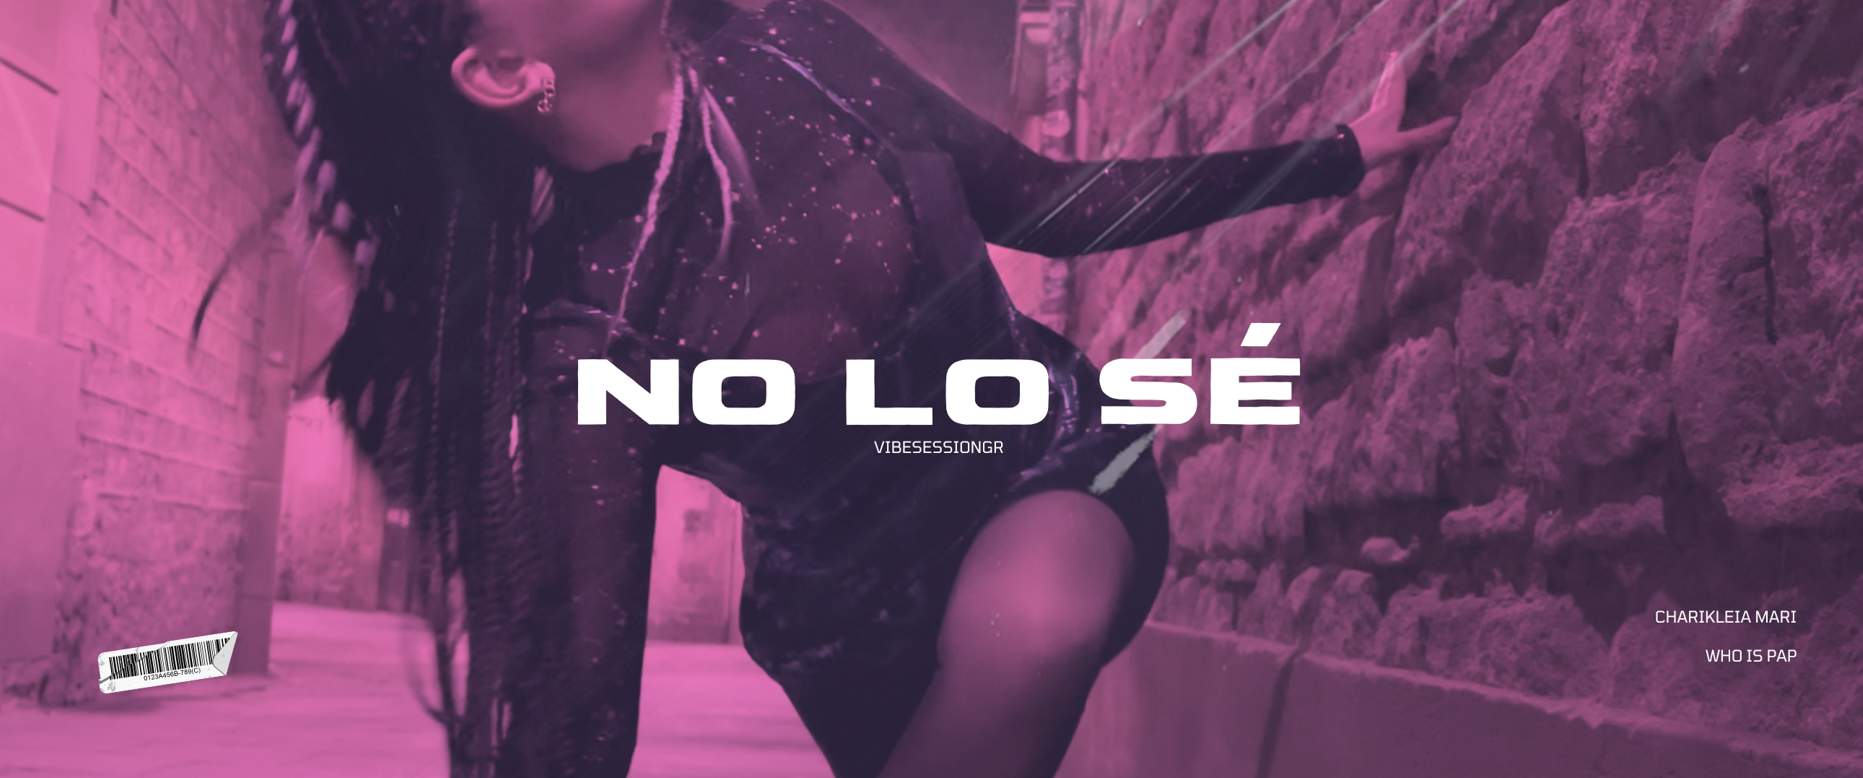 "NO LO SE" the new song by Chariklia Mari & Vibesessiongr that gives a strong social message about healthy interpersonal relationships, breaking the bias against women.